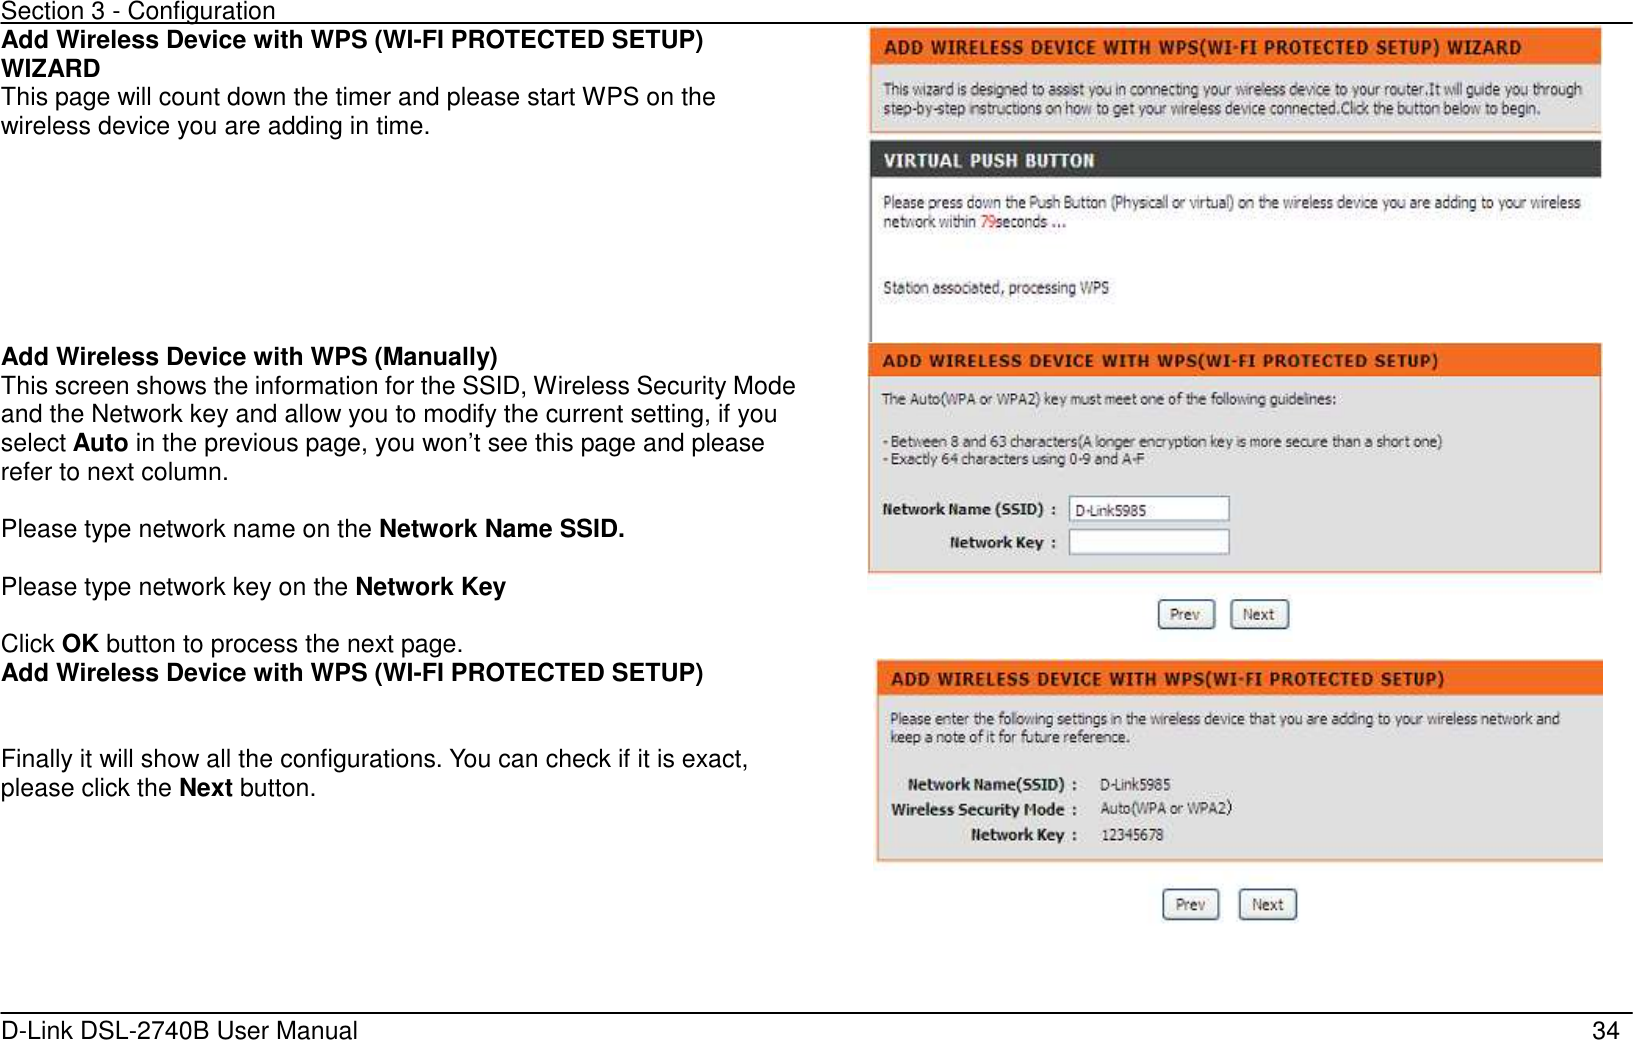 Section 3 - Configuration   D-Link DSL-2740B User Manual                                                  34 Add Wireless Device with WPS (WI-FI PROTECTED SETUP) WIZARD This page will count down the timer and please start WPS on the wireless device you are adding in time.  Add Wireless Device with WPS (Manually) This screen shows the information for the SSID, Wireless Security Mode and the Network key and allow you to modify the current setting, if you select Auto in the previous page, you won’t see this page and please refer to next column.  Please type network name on the Network Name SSID.  Please type network key on the Network Key  Click OK button to process the next page.  Add Wireless Device with WPS (WI-FI PROTECTED SETUP)   Finally it will show all the configurations. You can check if it is exact, please click the Next button.    